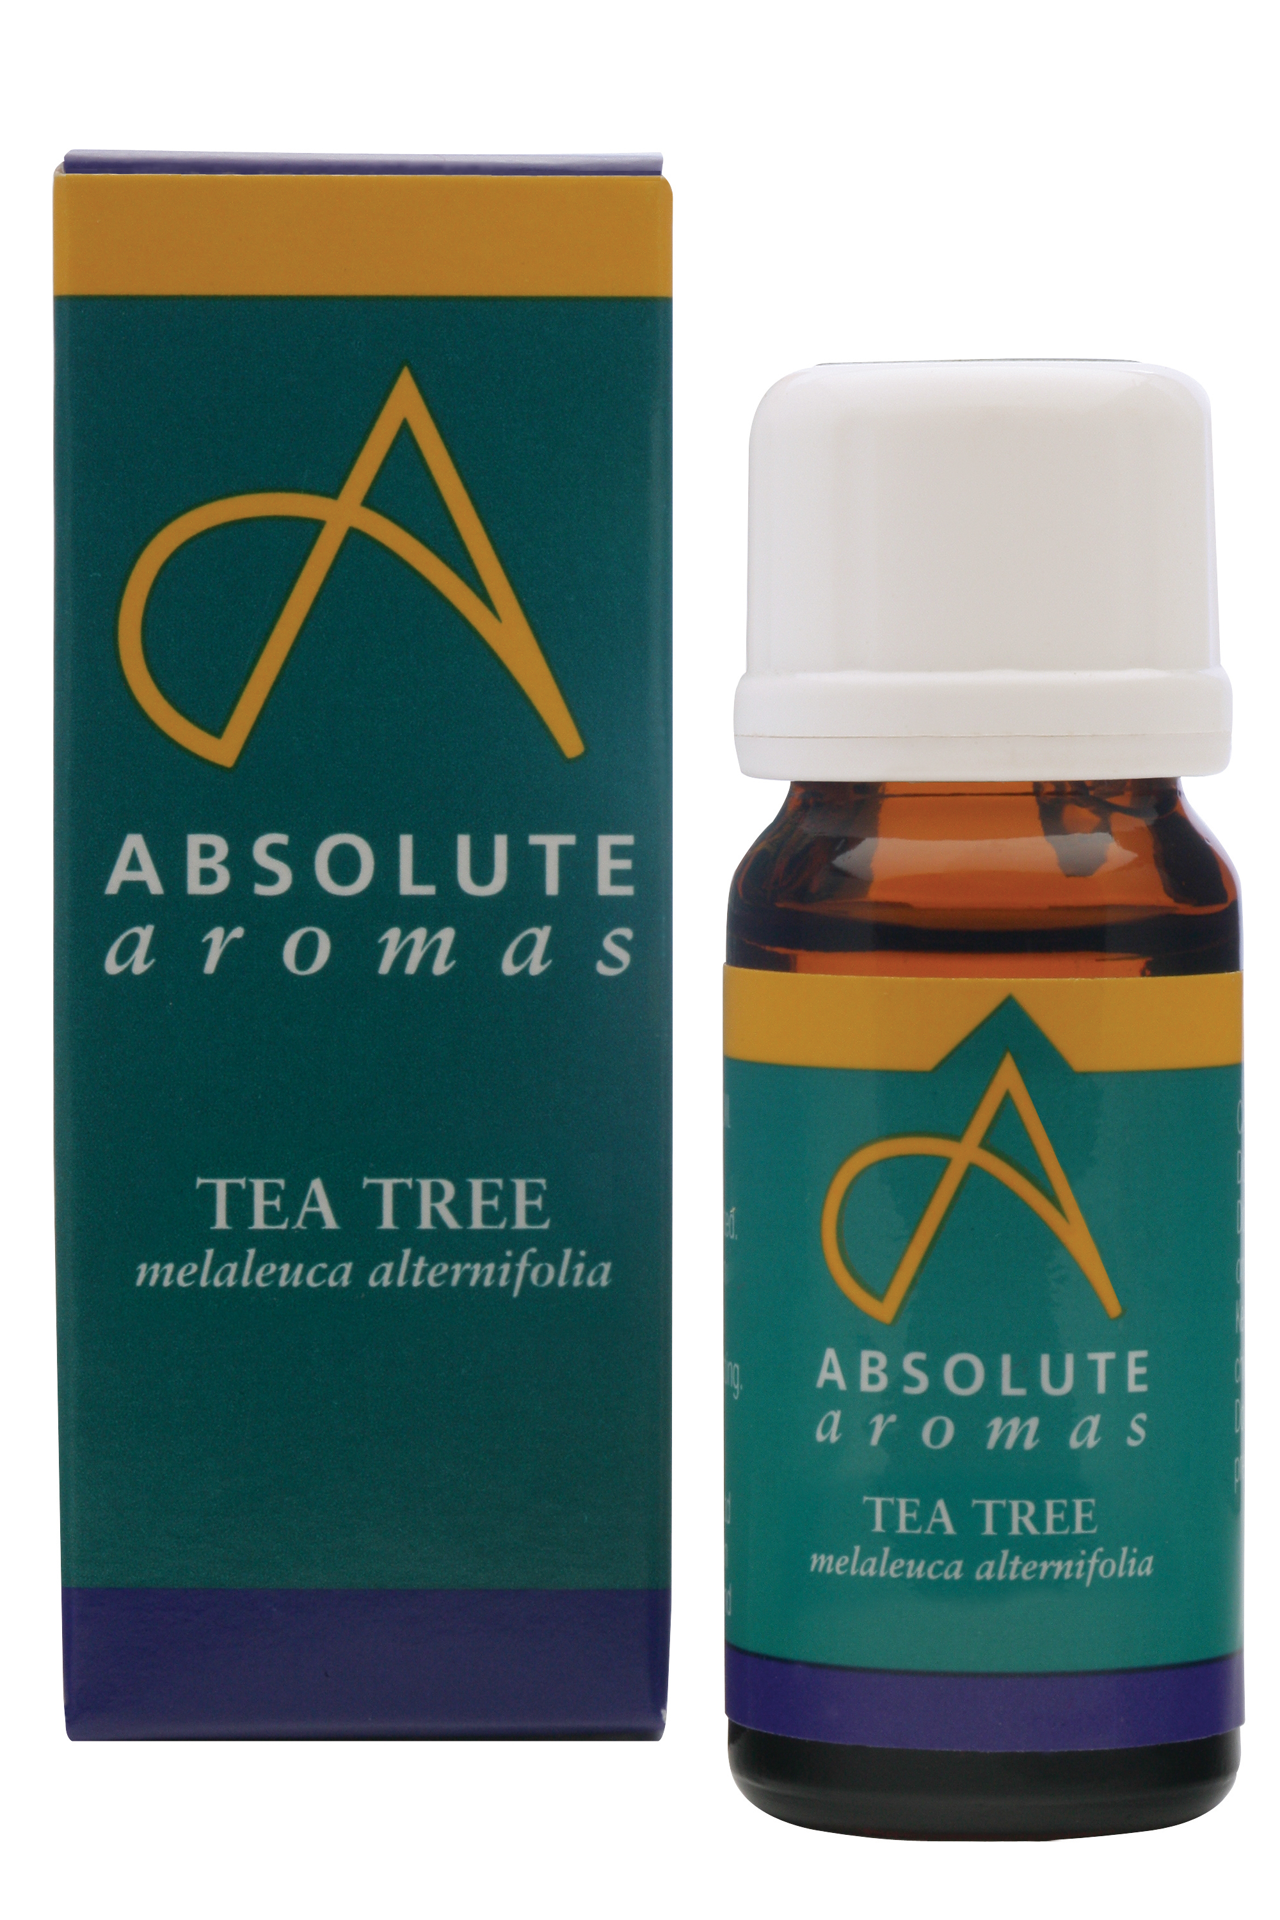 Buy 1 Get 1 Half Price Absolute Aromas Peppermint Oil and Tea Tree Oil